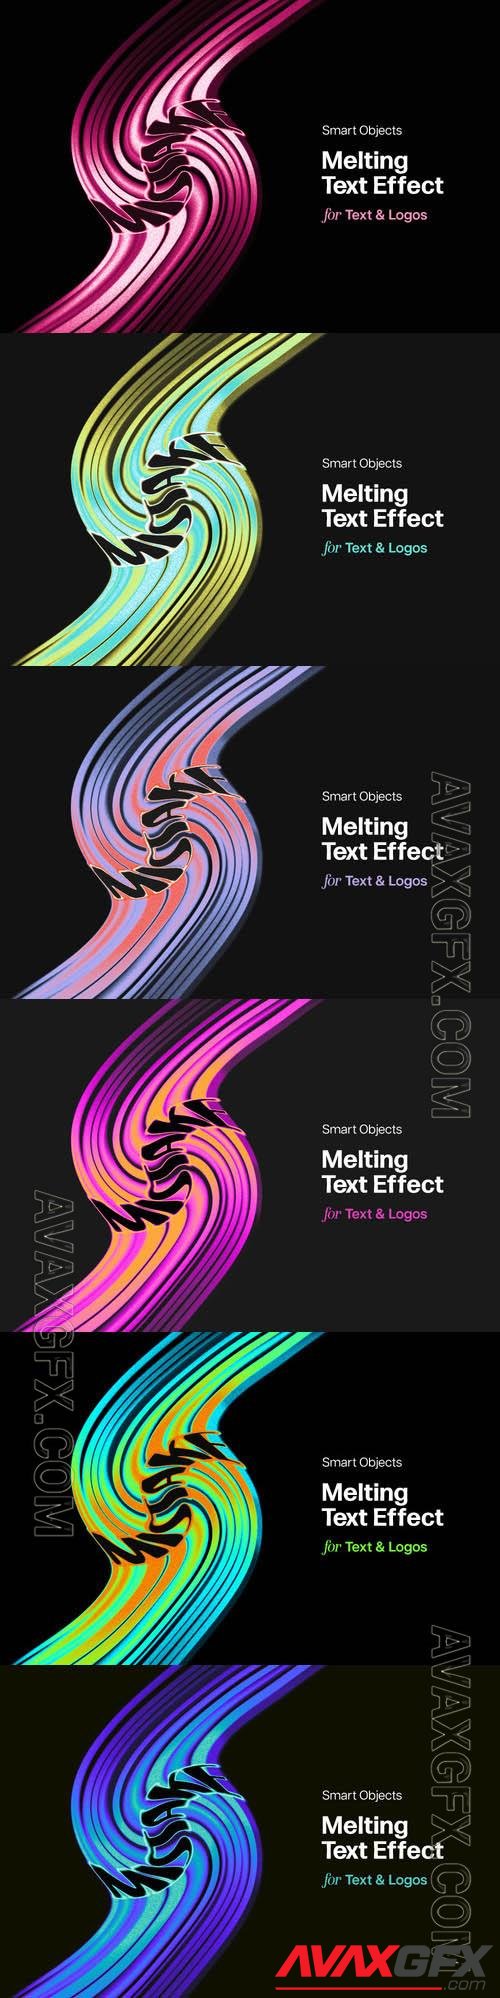 PSD melted text effect